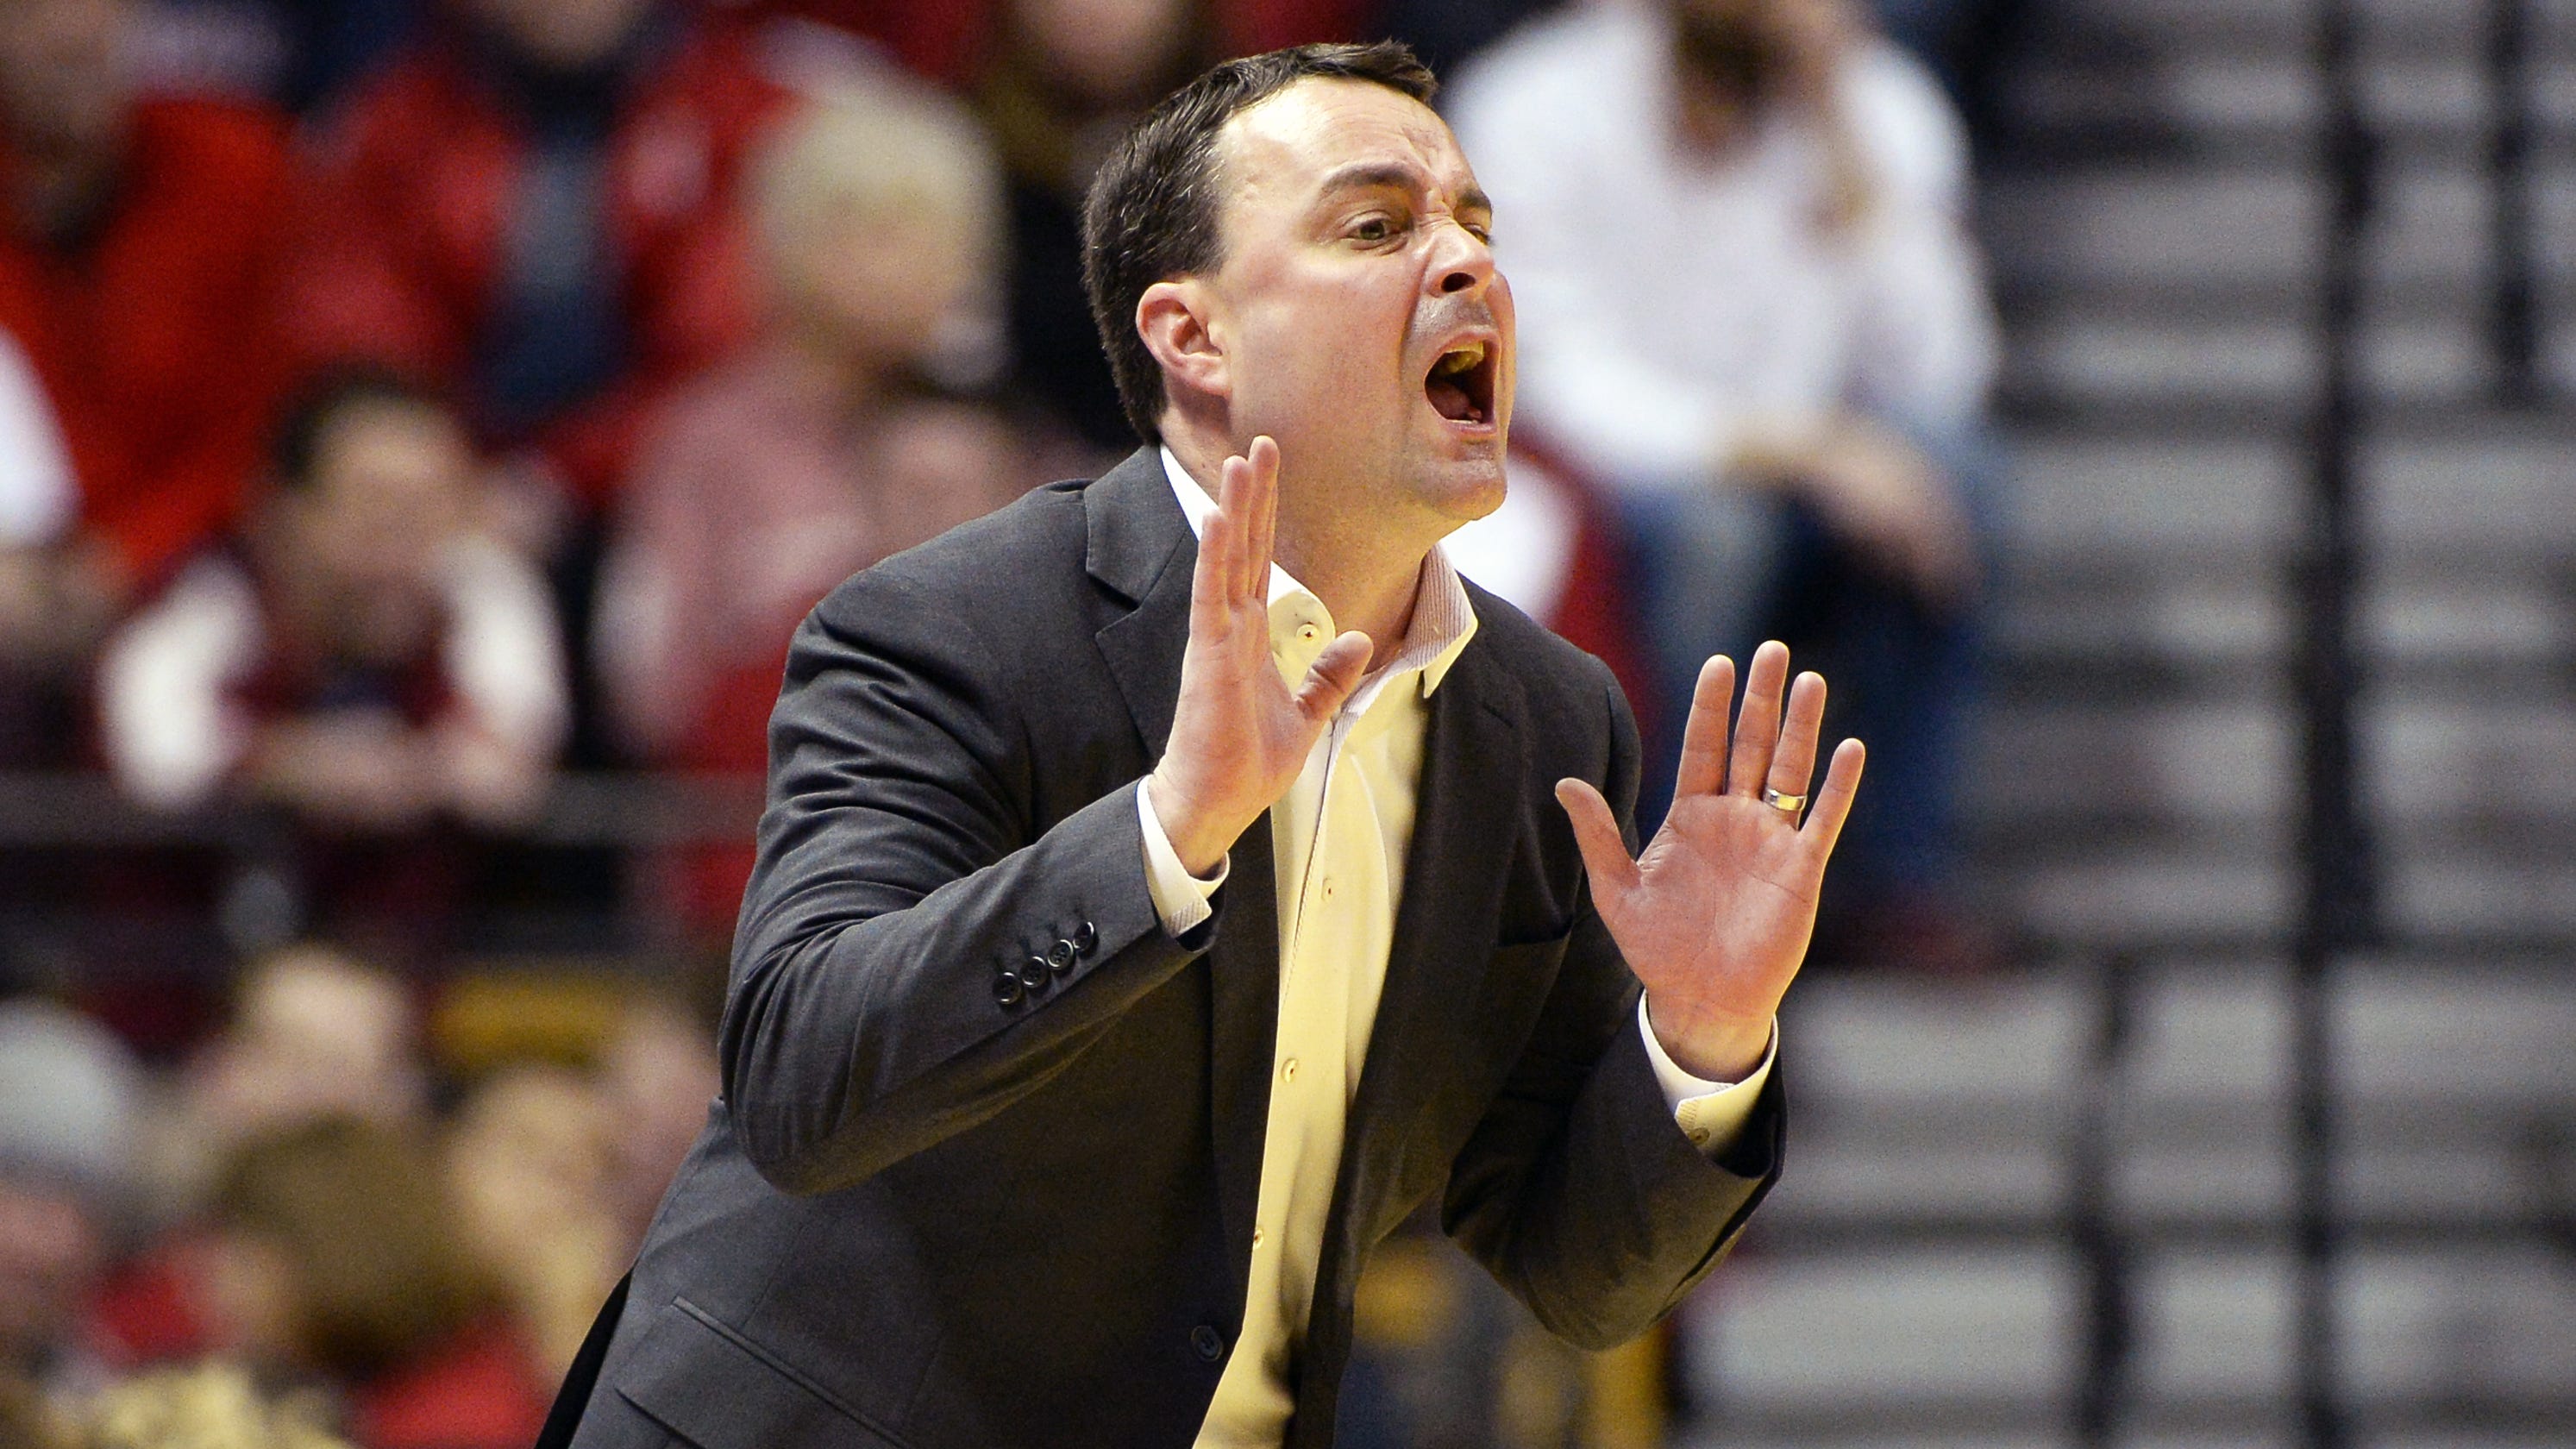 Indiana coach Archie Miller blasts team as 'soft' and 'scared'